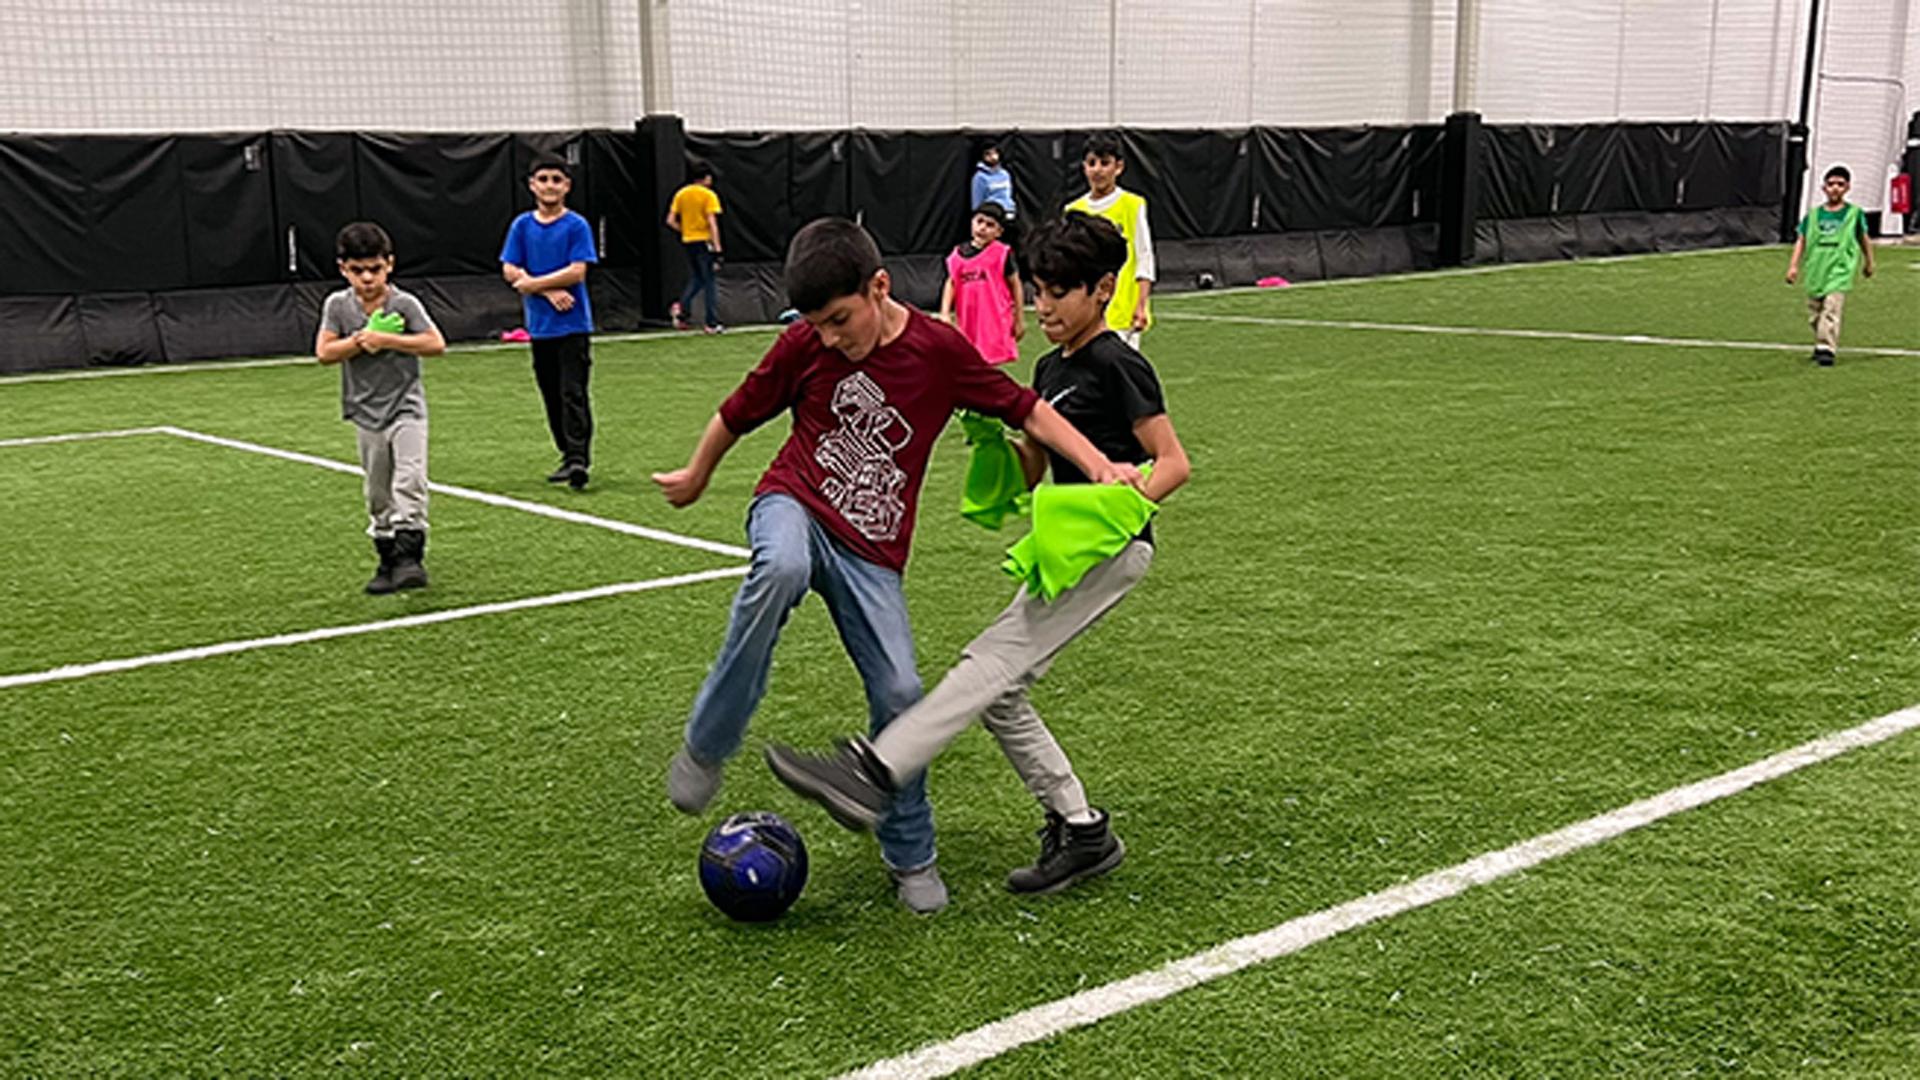 Some of the younger boys of newly arrived Afghan refugees play in their own game at a St. Louis sports facility. The weekly get-together is a chance to exercise and make new friends.